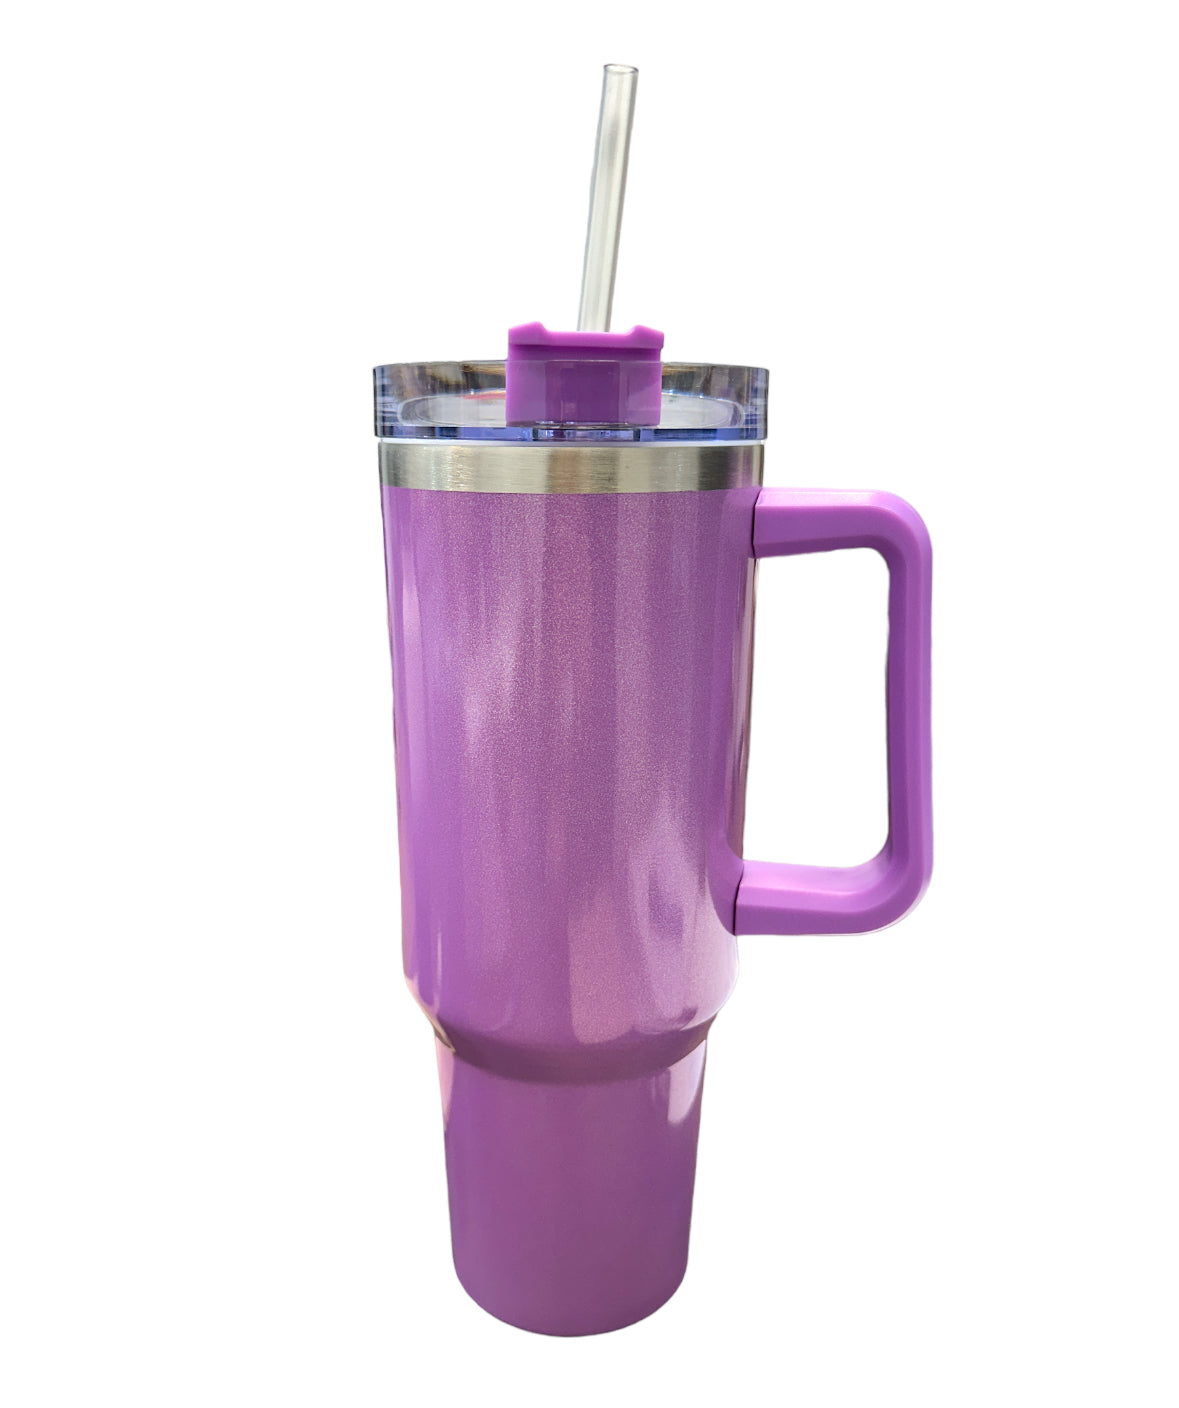 Bubba Envy Insulated Tumbler with Straw, 48oz-Ideal Travel Mug